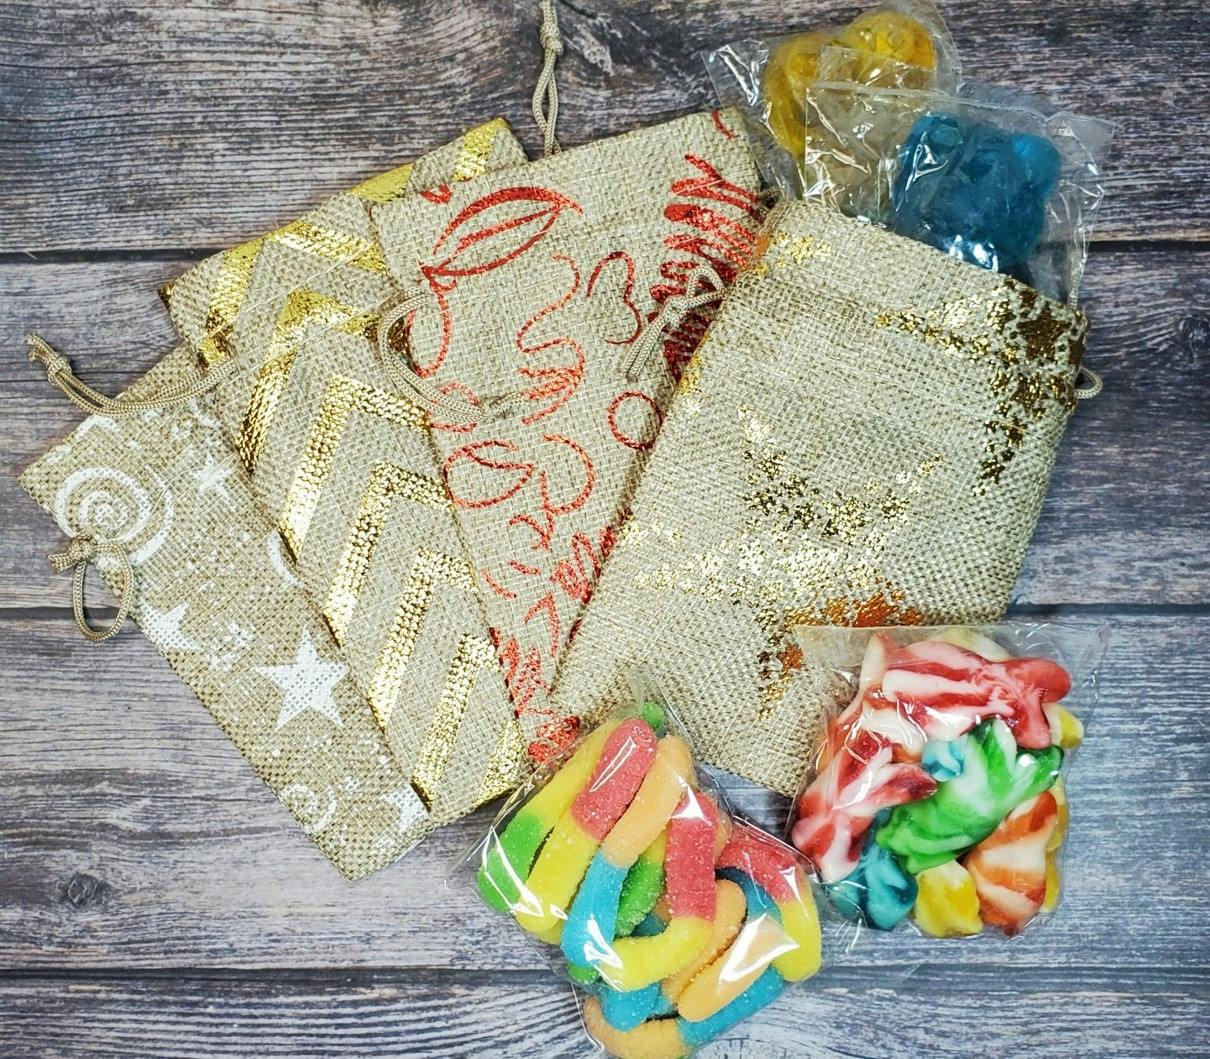 Burlap Bags with candy